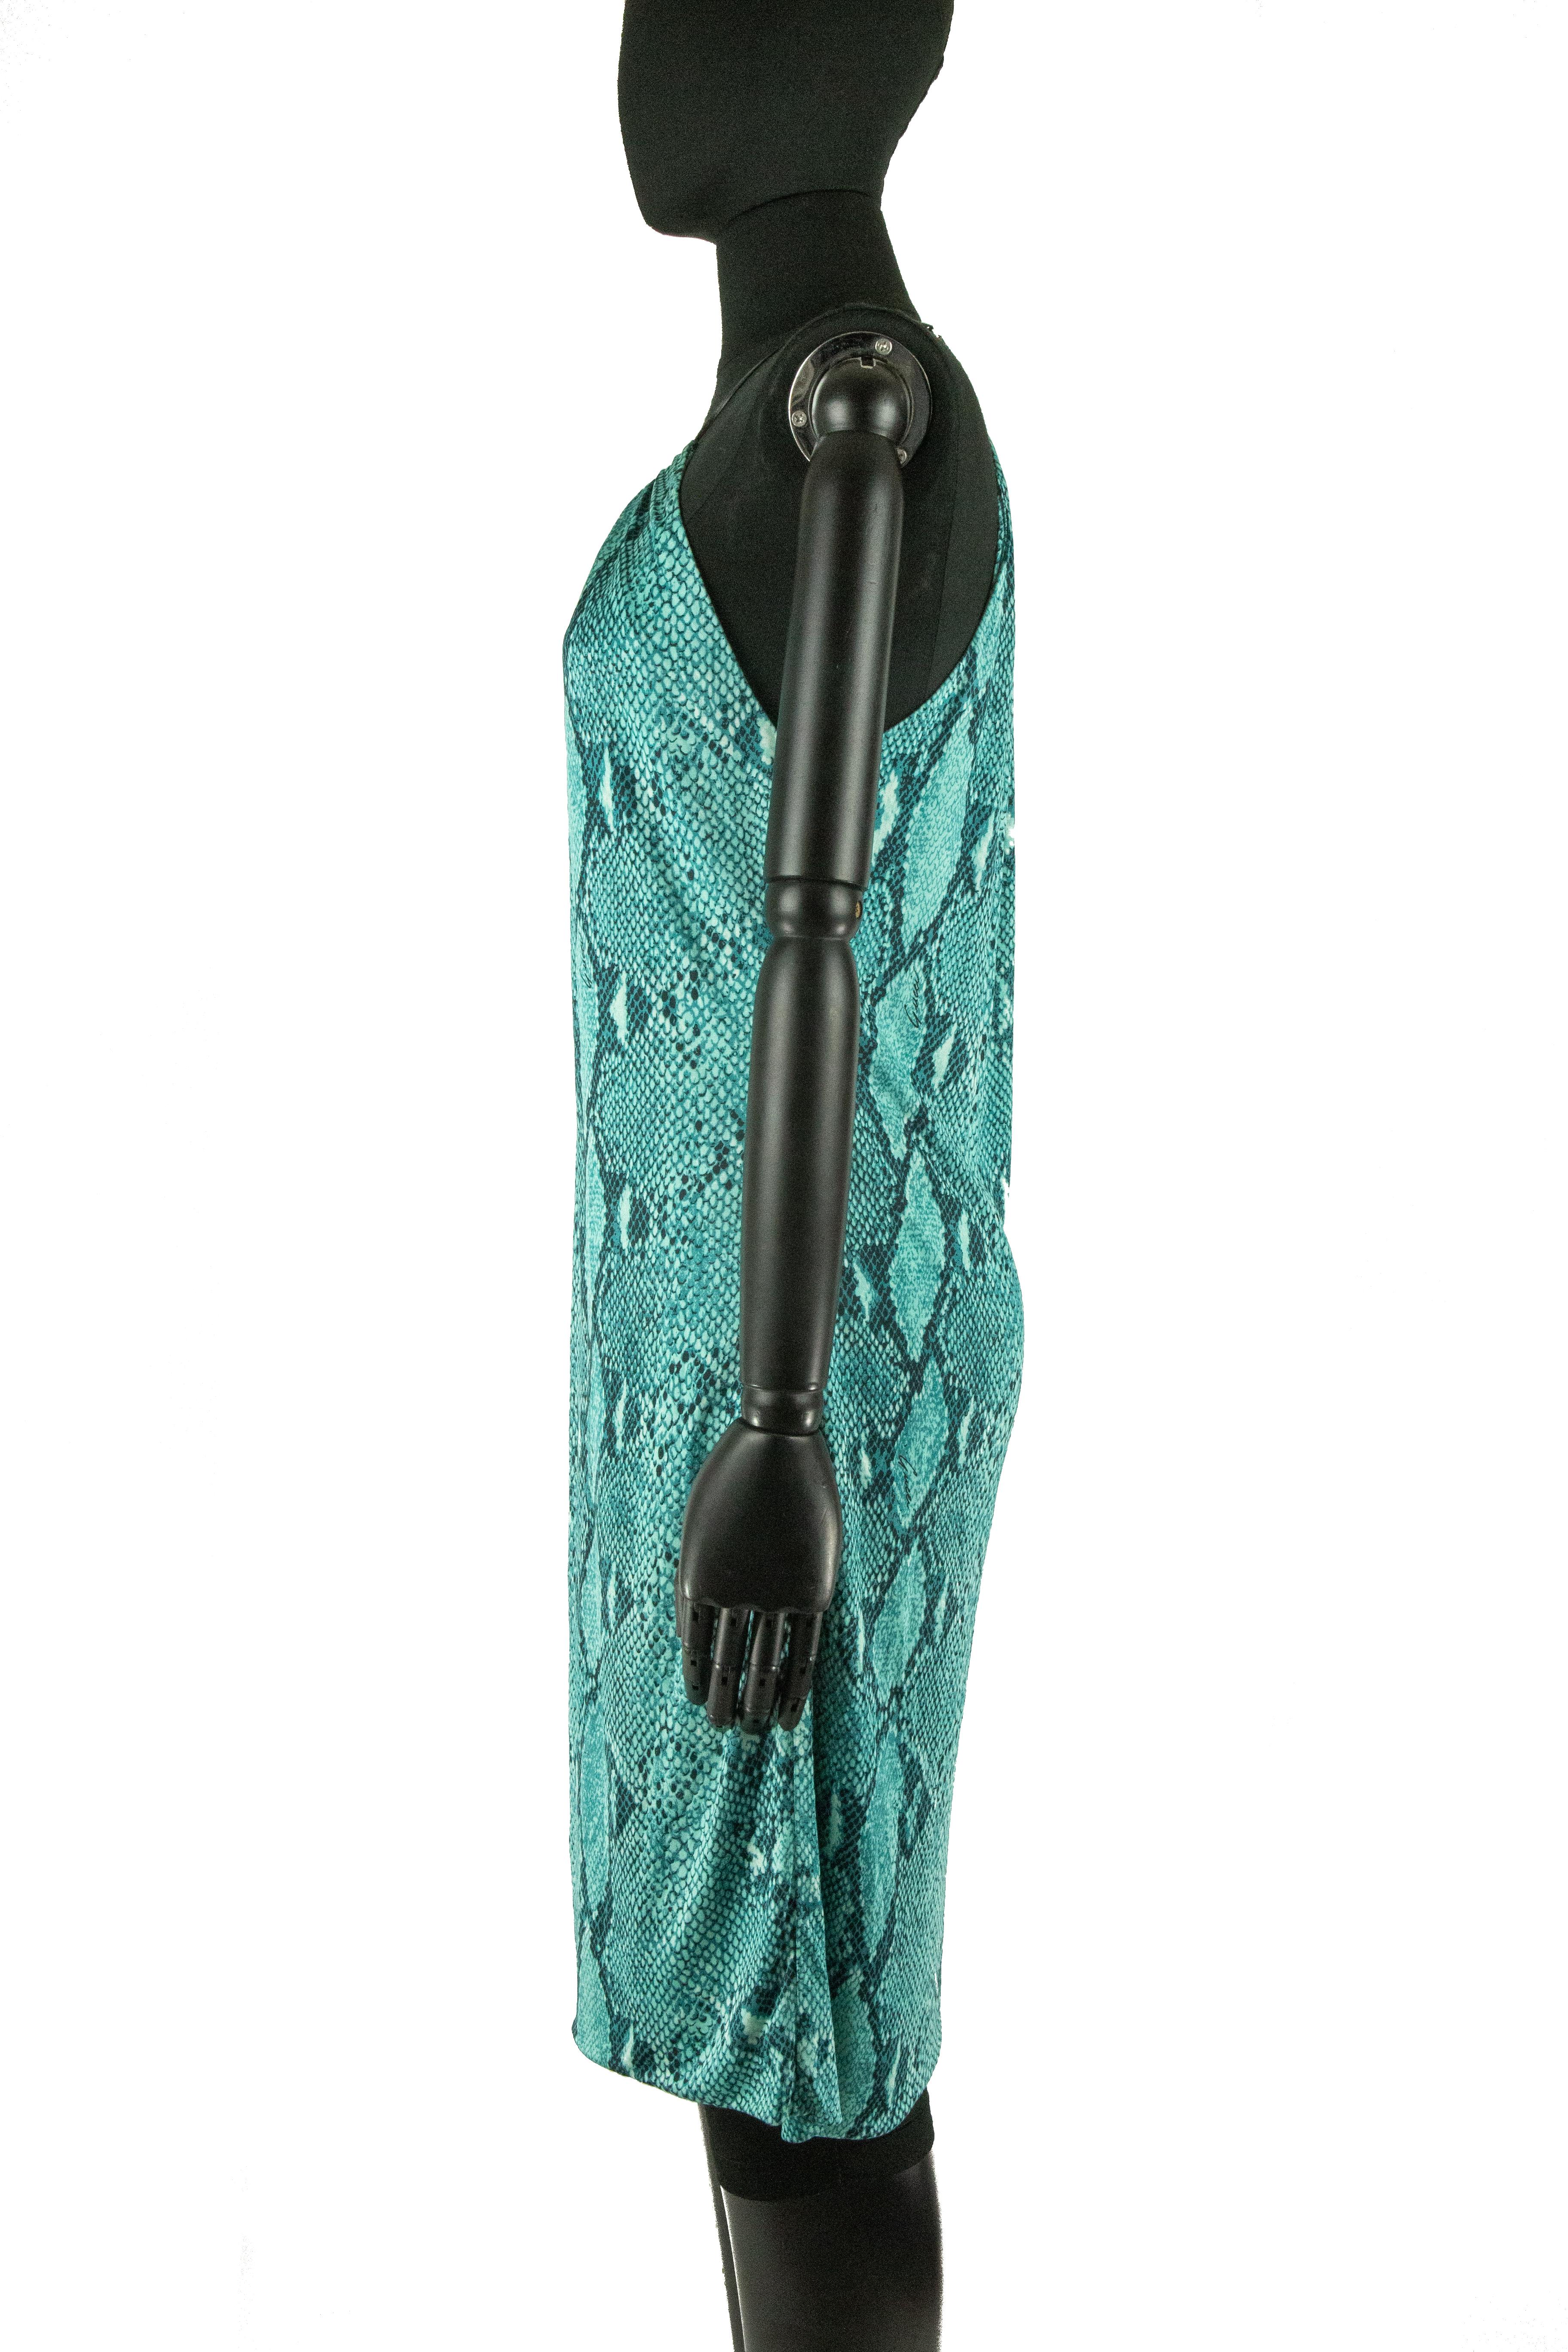 A Spring 2000 Gucci by Tom Ford jersey dress with an all-over snakeskin print incorporating the House script, in shades of verdigris-green, turquoise and black, all suspended on a fine black leather continuous strap forming a jewel neckline, the